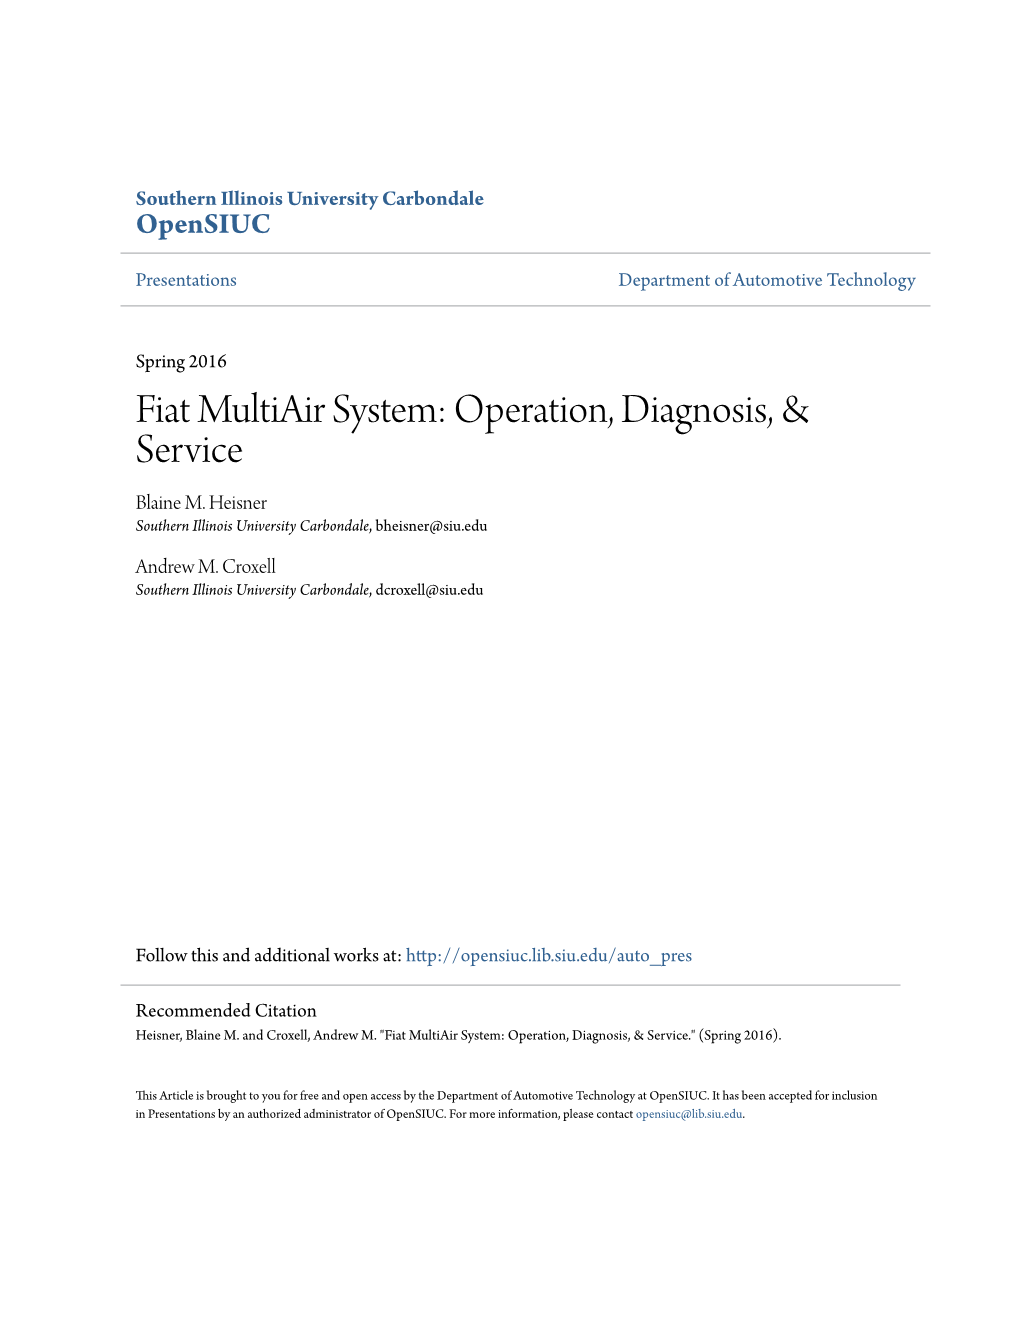 Fiat Multiair System: Operation, Diagnosis, & Service